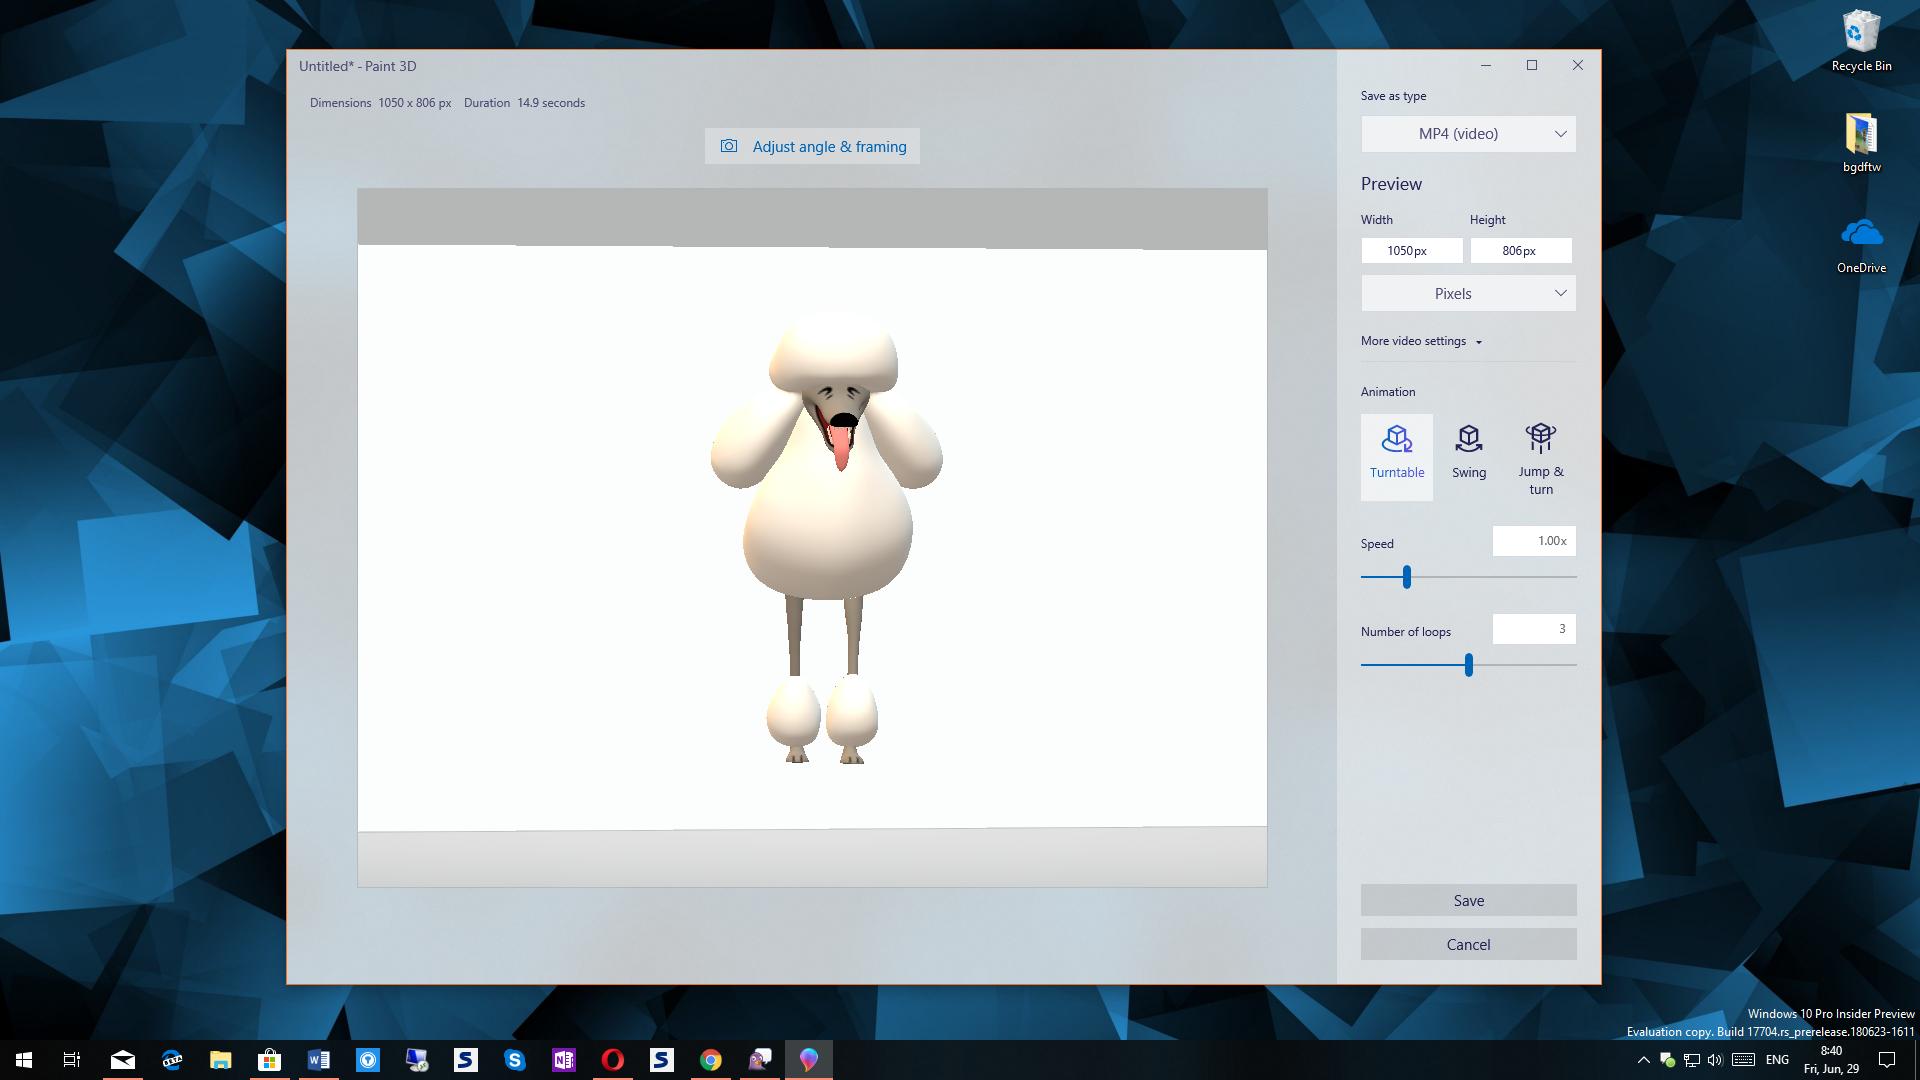 Windows 10's Paint 3D App Receives Update to Save Projects to Video